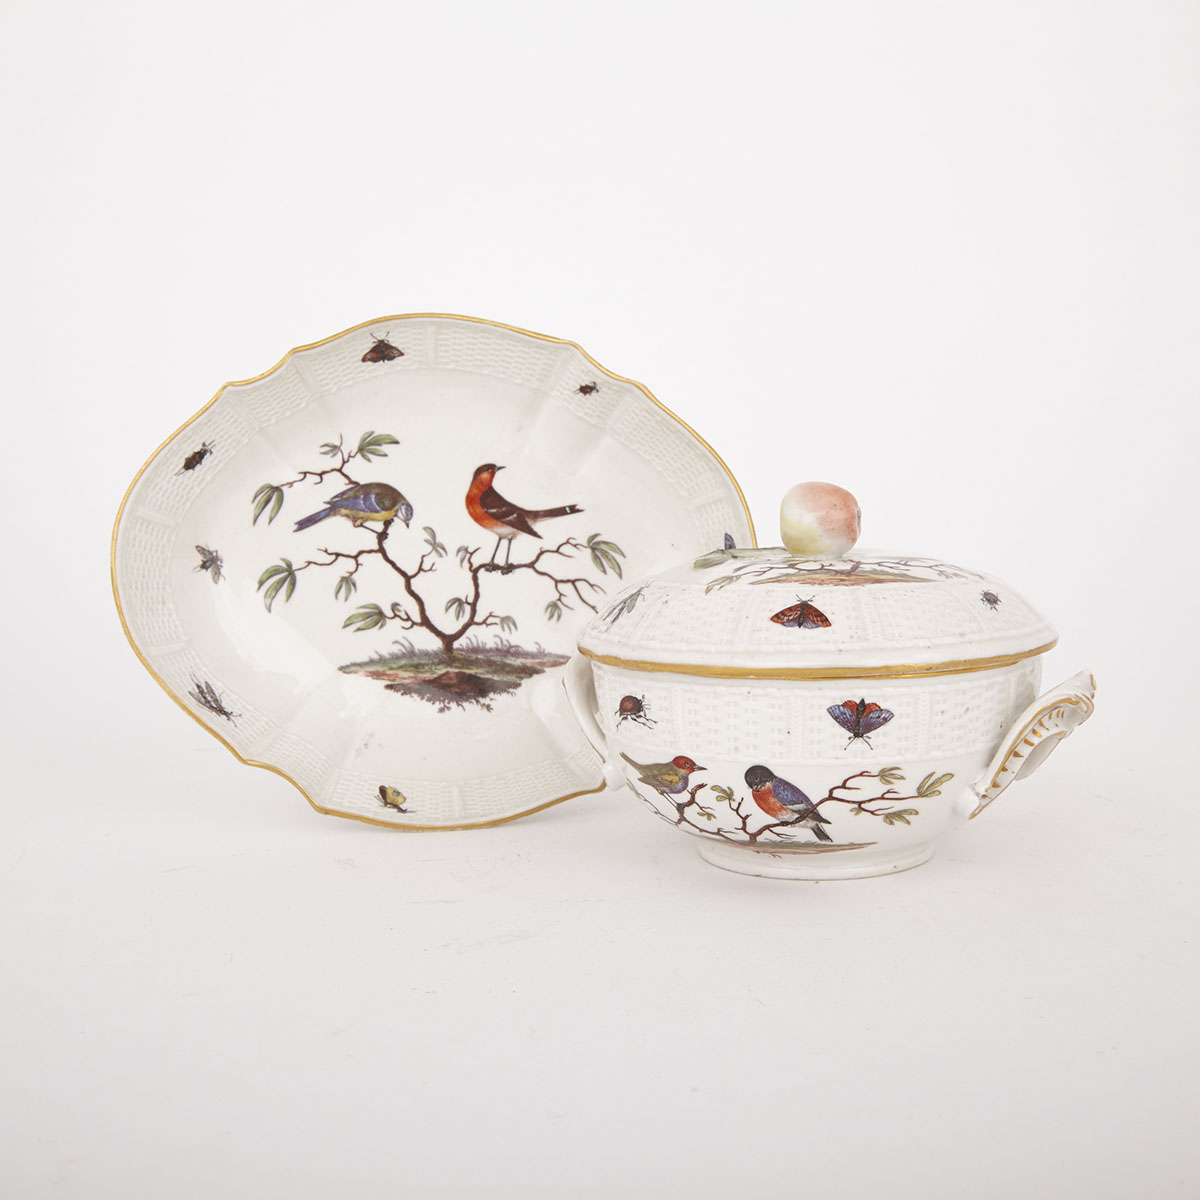 Ludwigsburg Ornithological Ecuelle with Cover and an Oval Stand, late 18th century